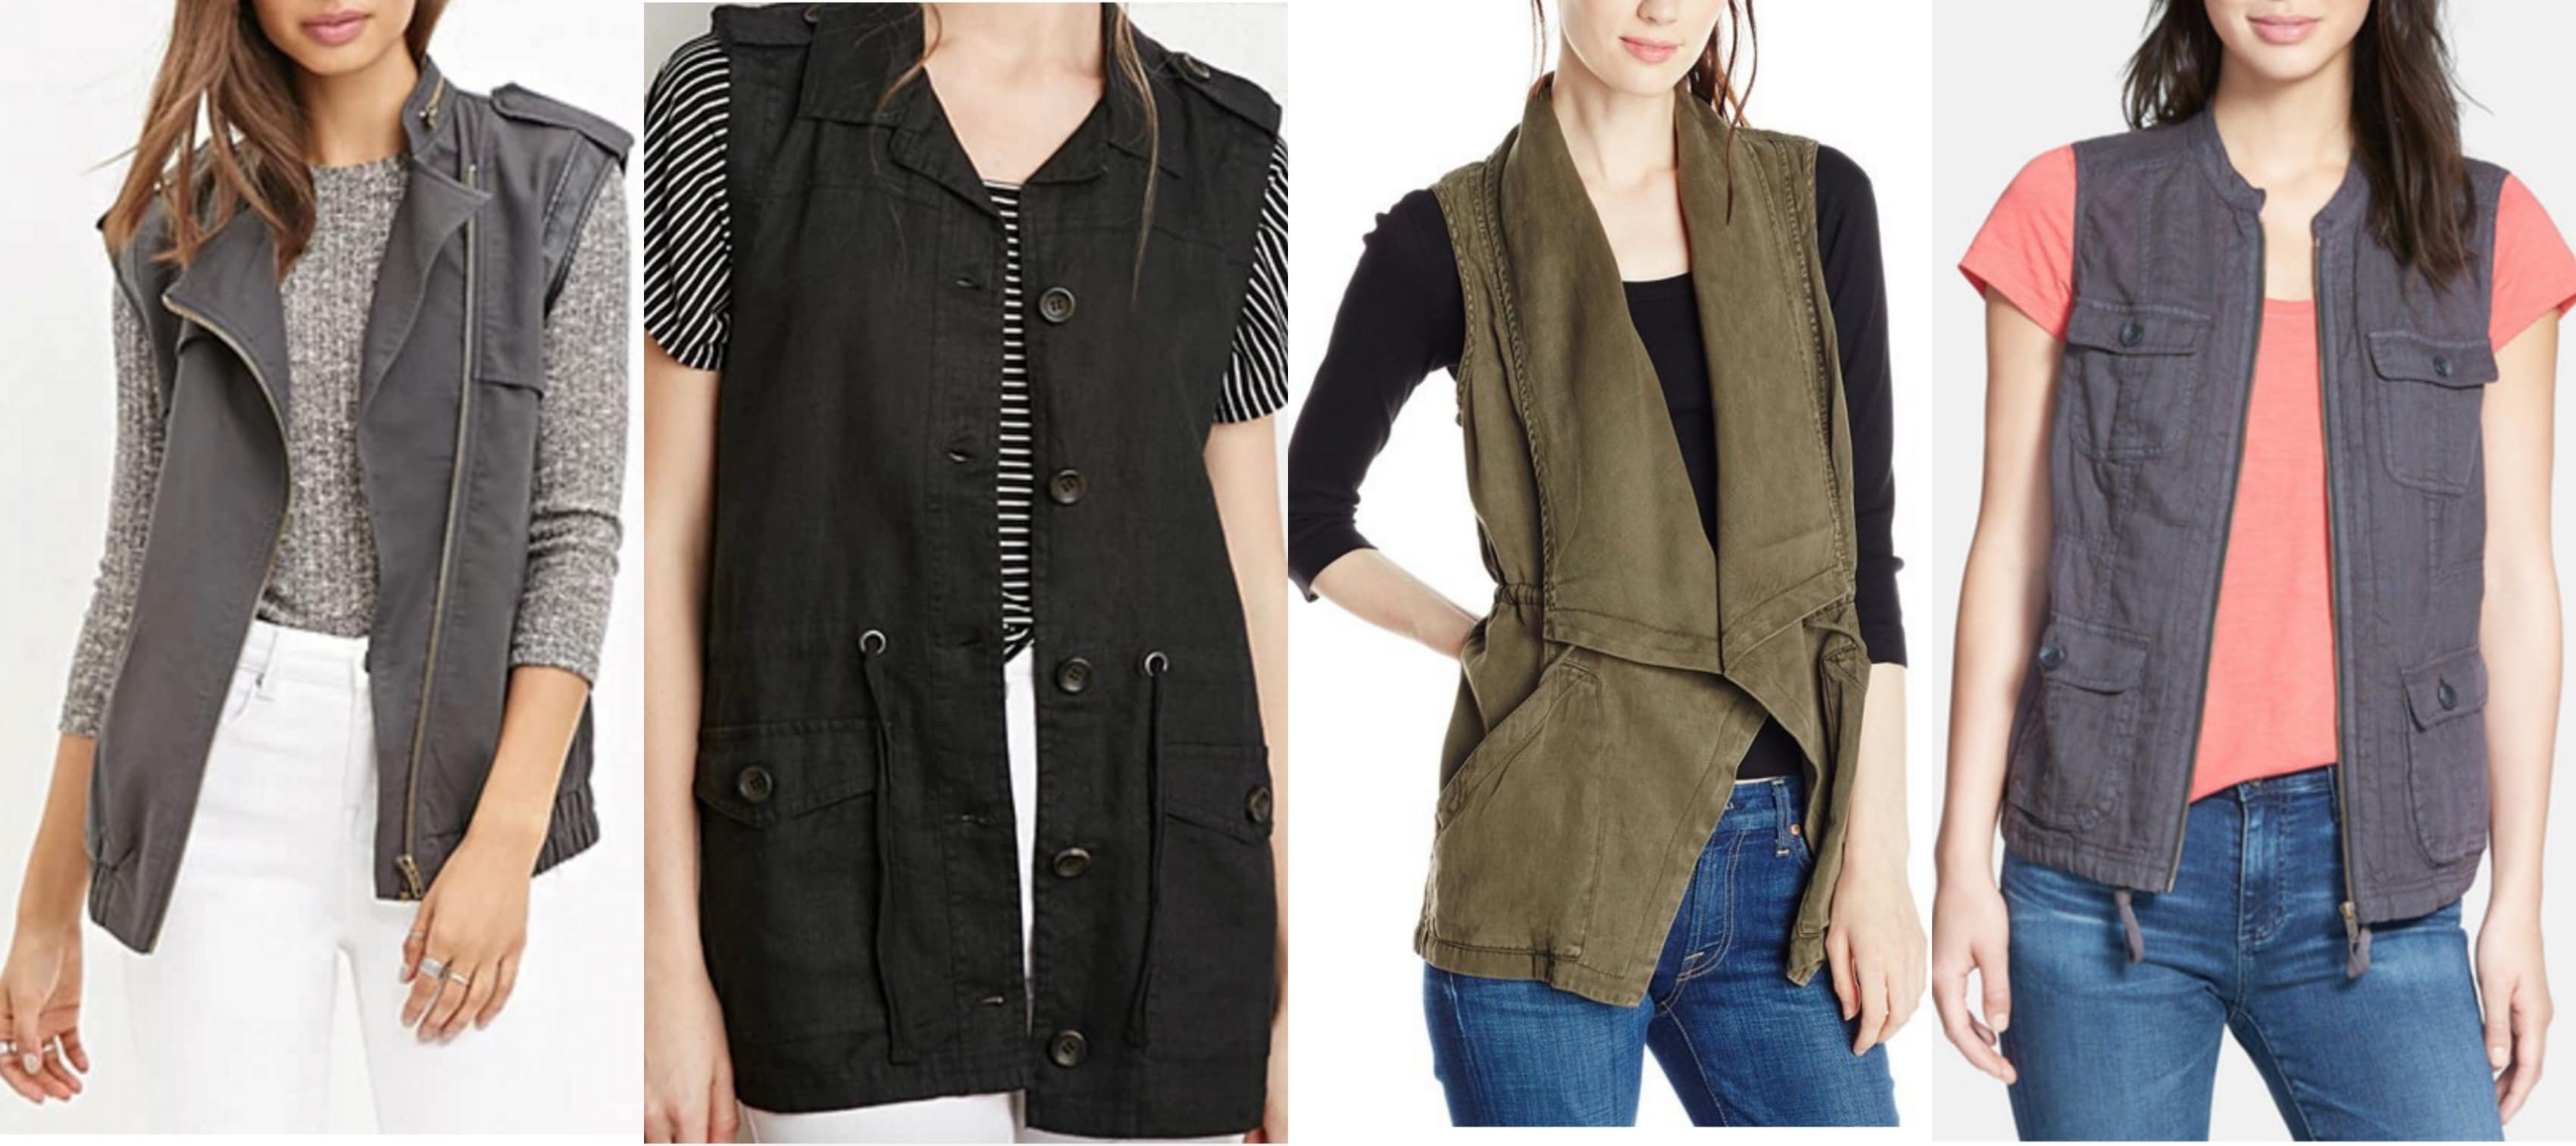 Fall's Best Layering Vests - Pretty Extraordinary